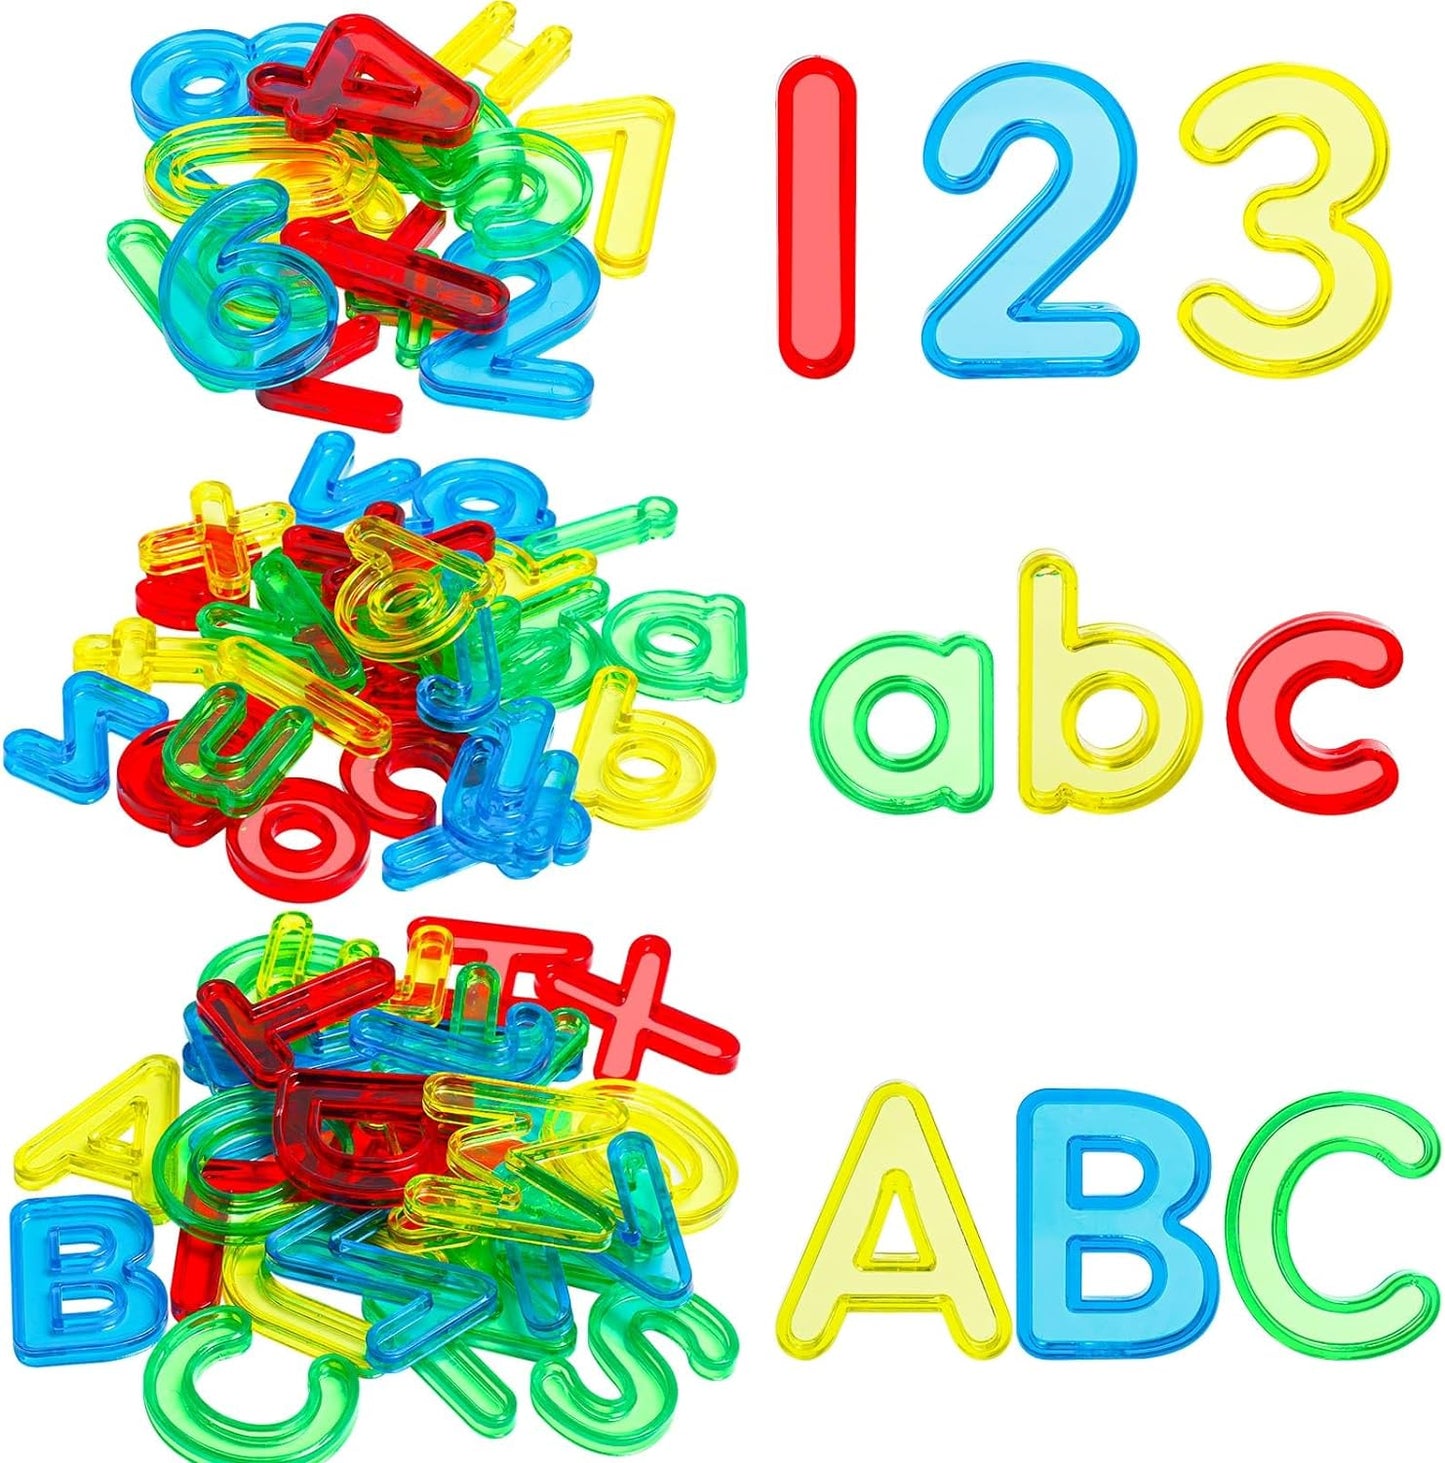 Transparent Letters Numbers 3-in-1 66 Pieces 透明大小寫英文字母及數字組合 66個